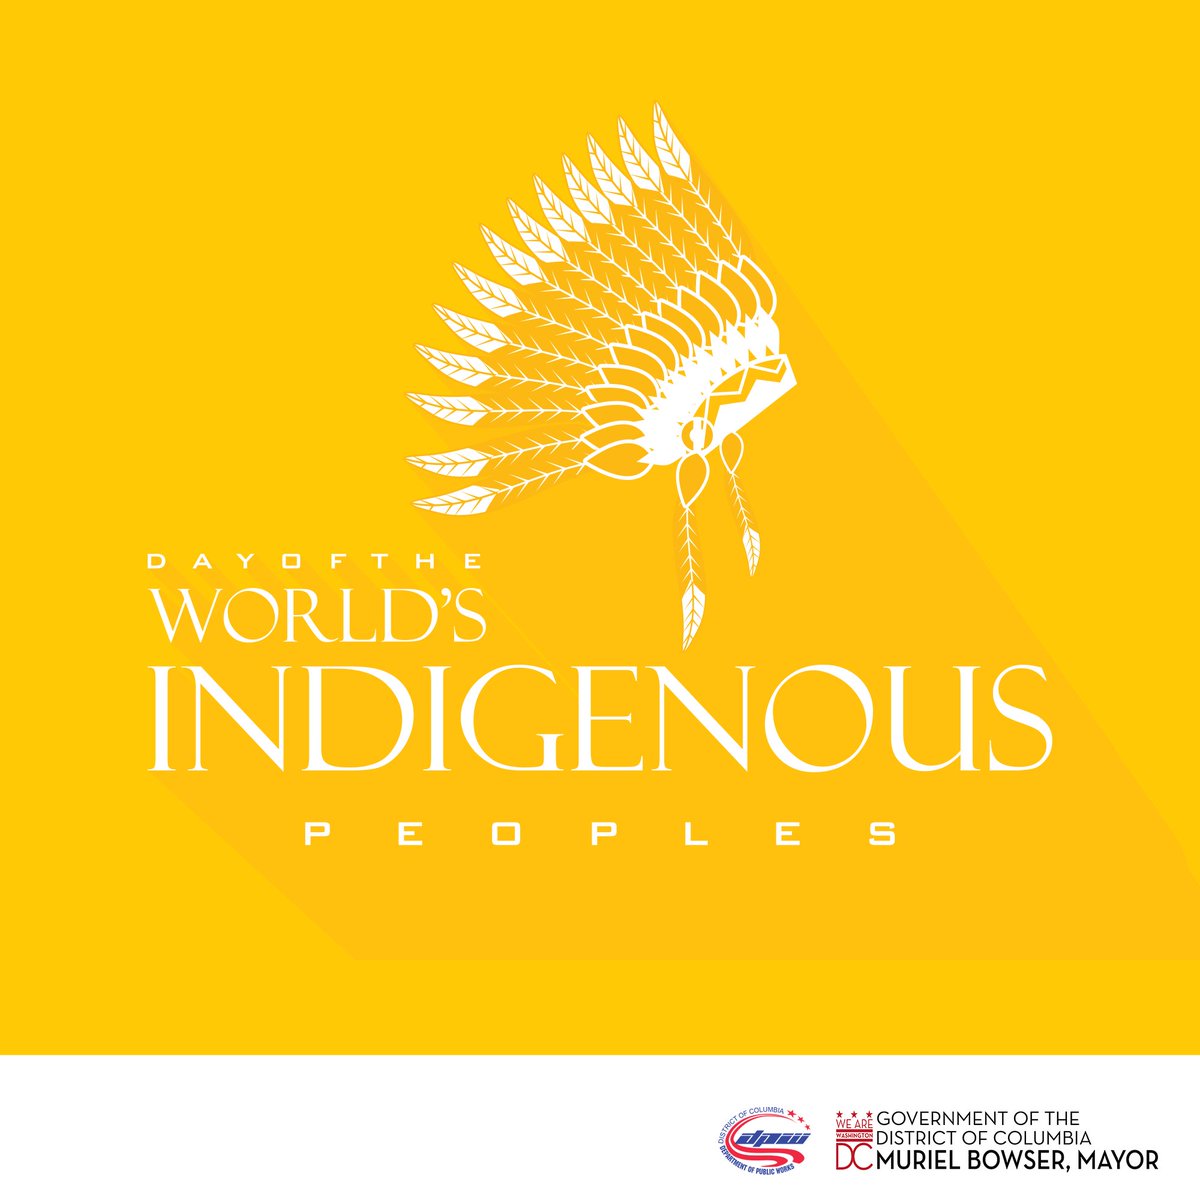 Happy Indigenous People's Day Day DC! DPW will experience service adjustments for the holiday. Collections will slide for the remainder of the week. For more information; dpw.dc.gov/publication/ho…